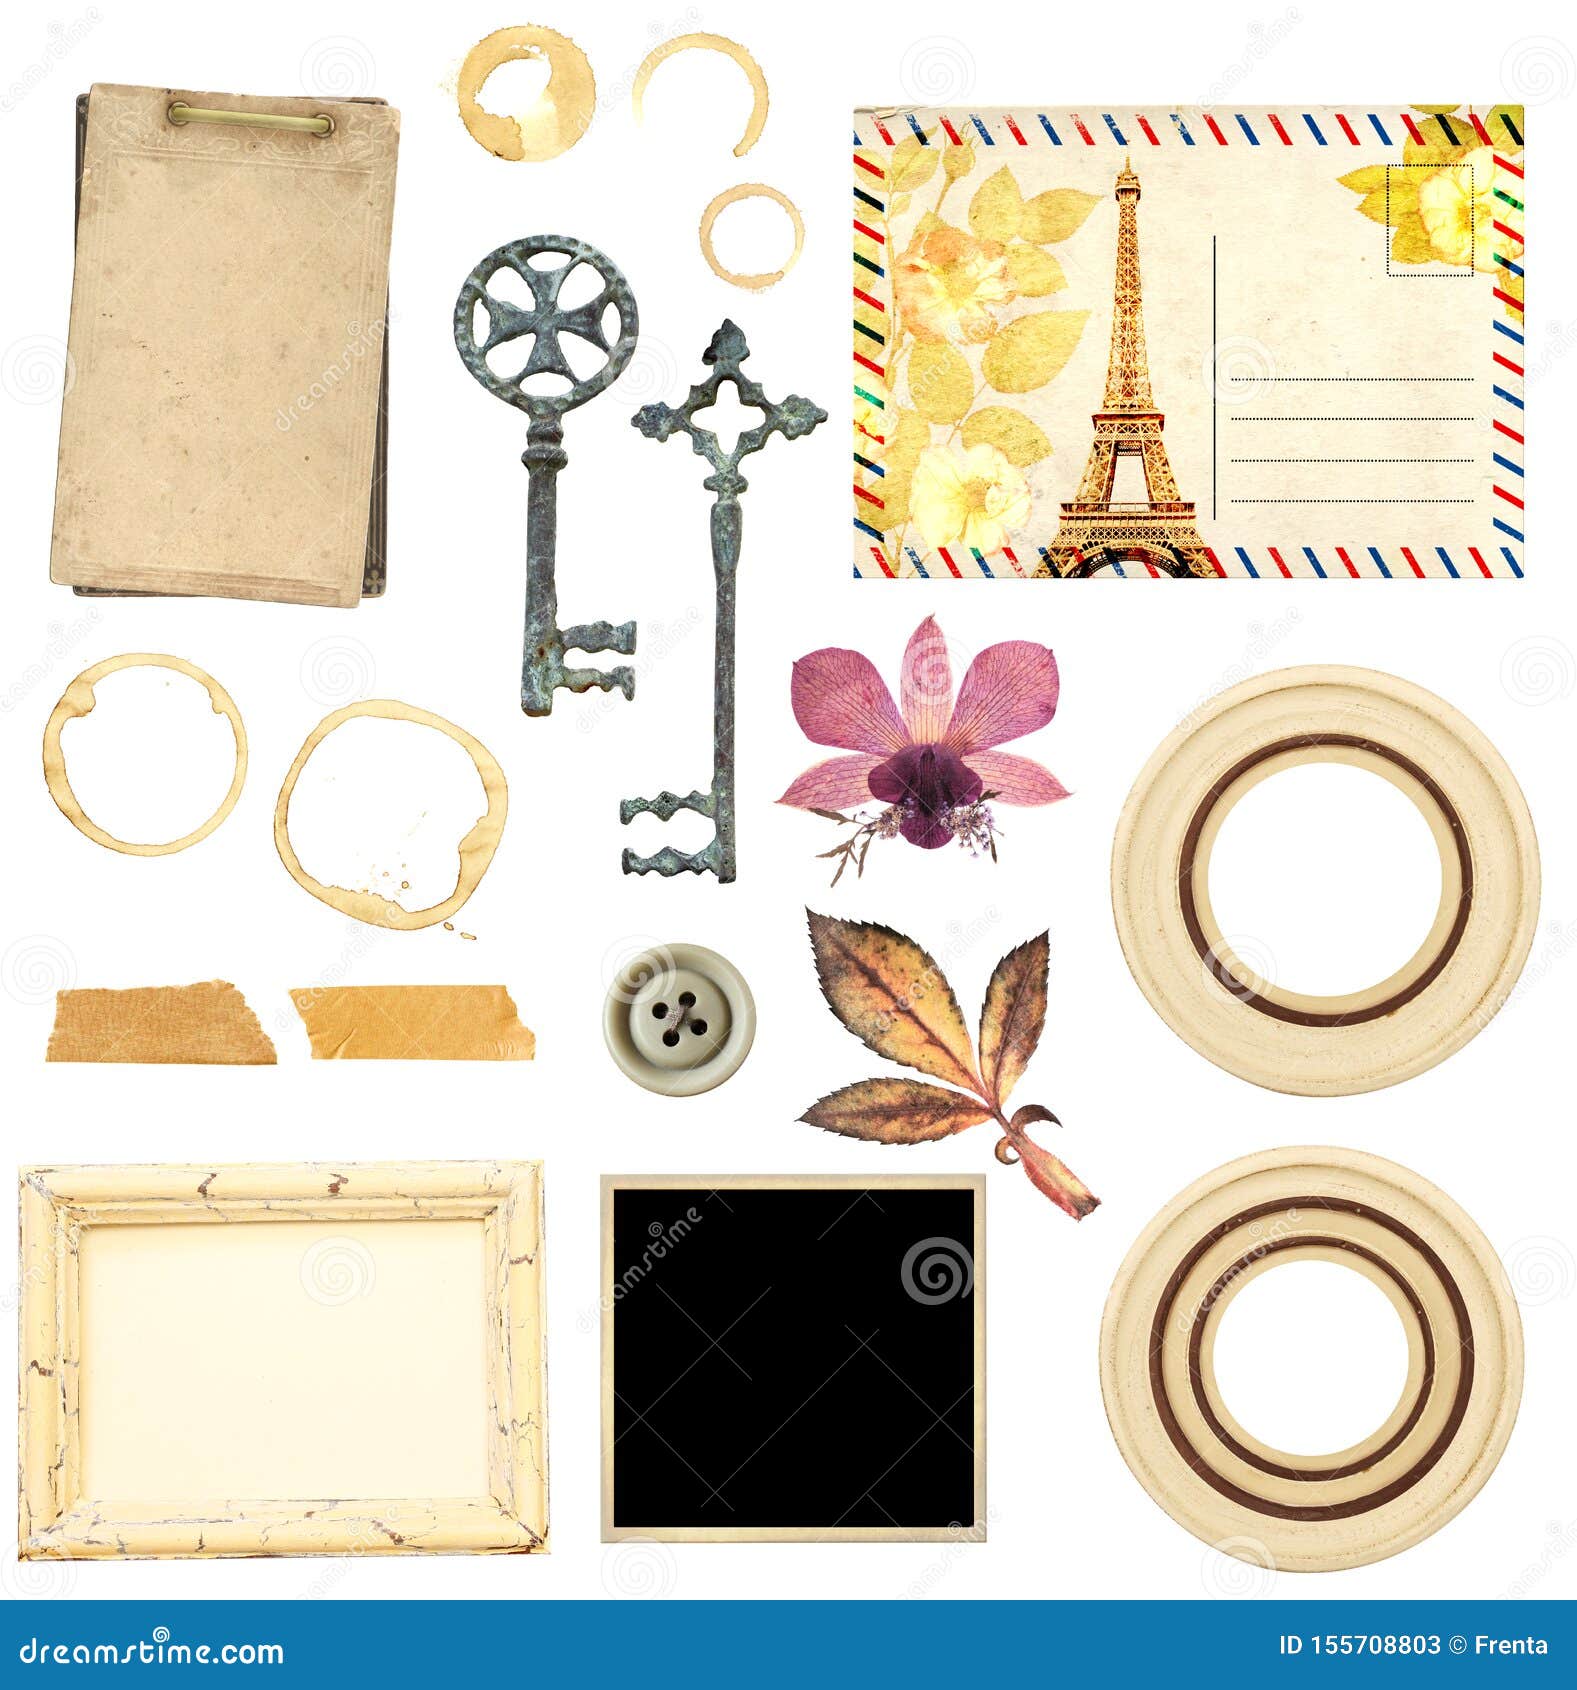 Scrap booking, on a white background, top view. Stock Photo by